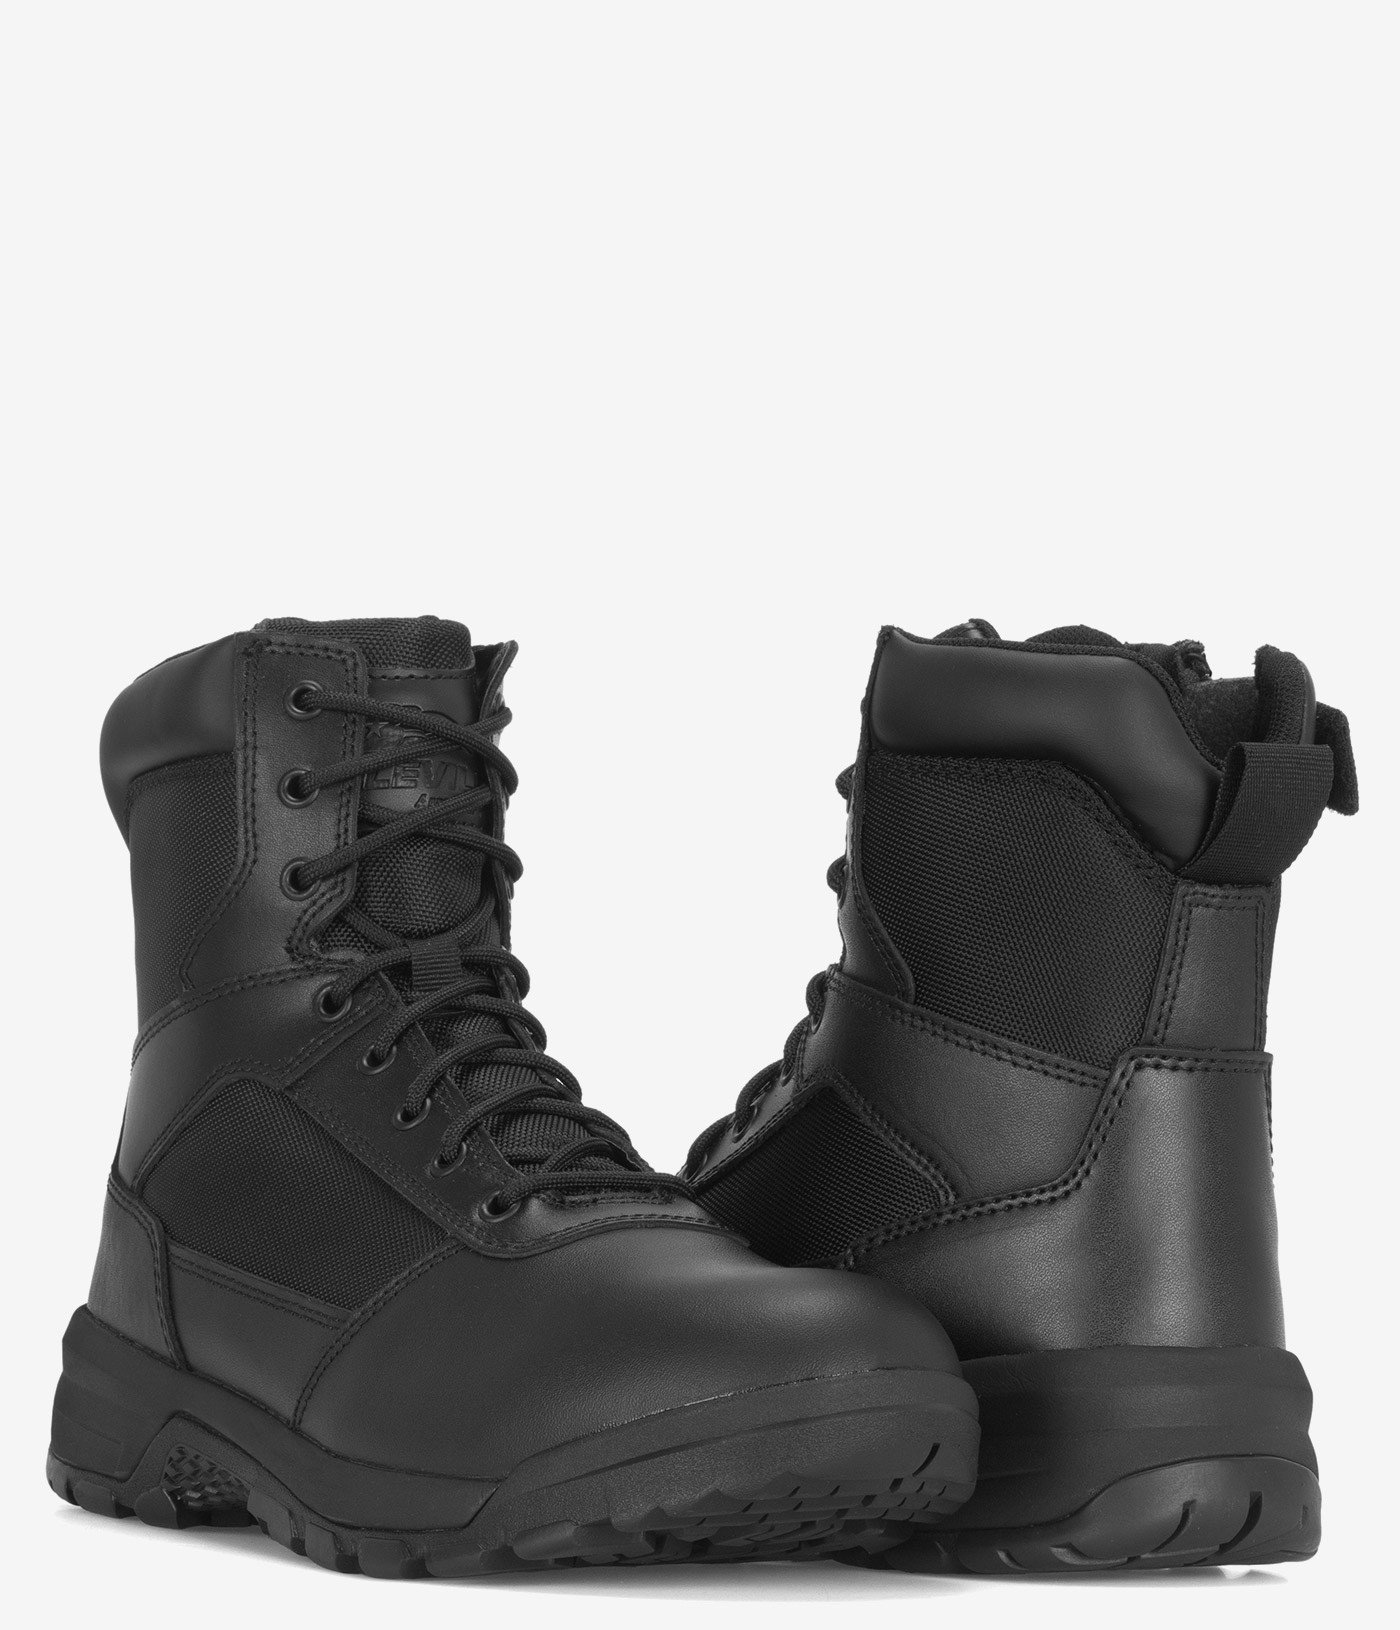 Belleville Spear Point Side Zip 8" Tactical Boot | Pair